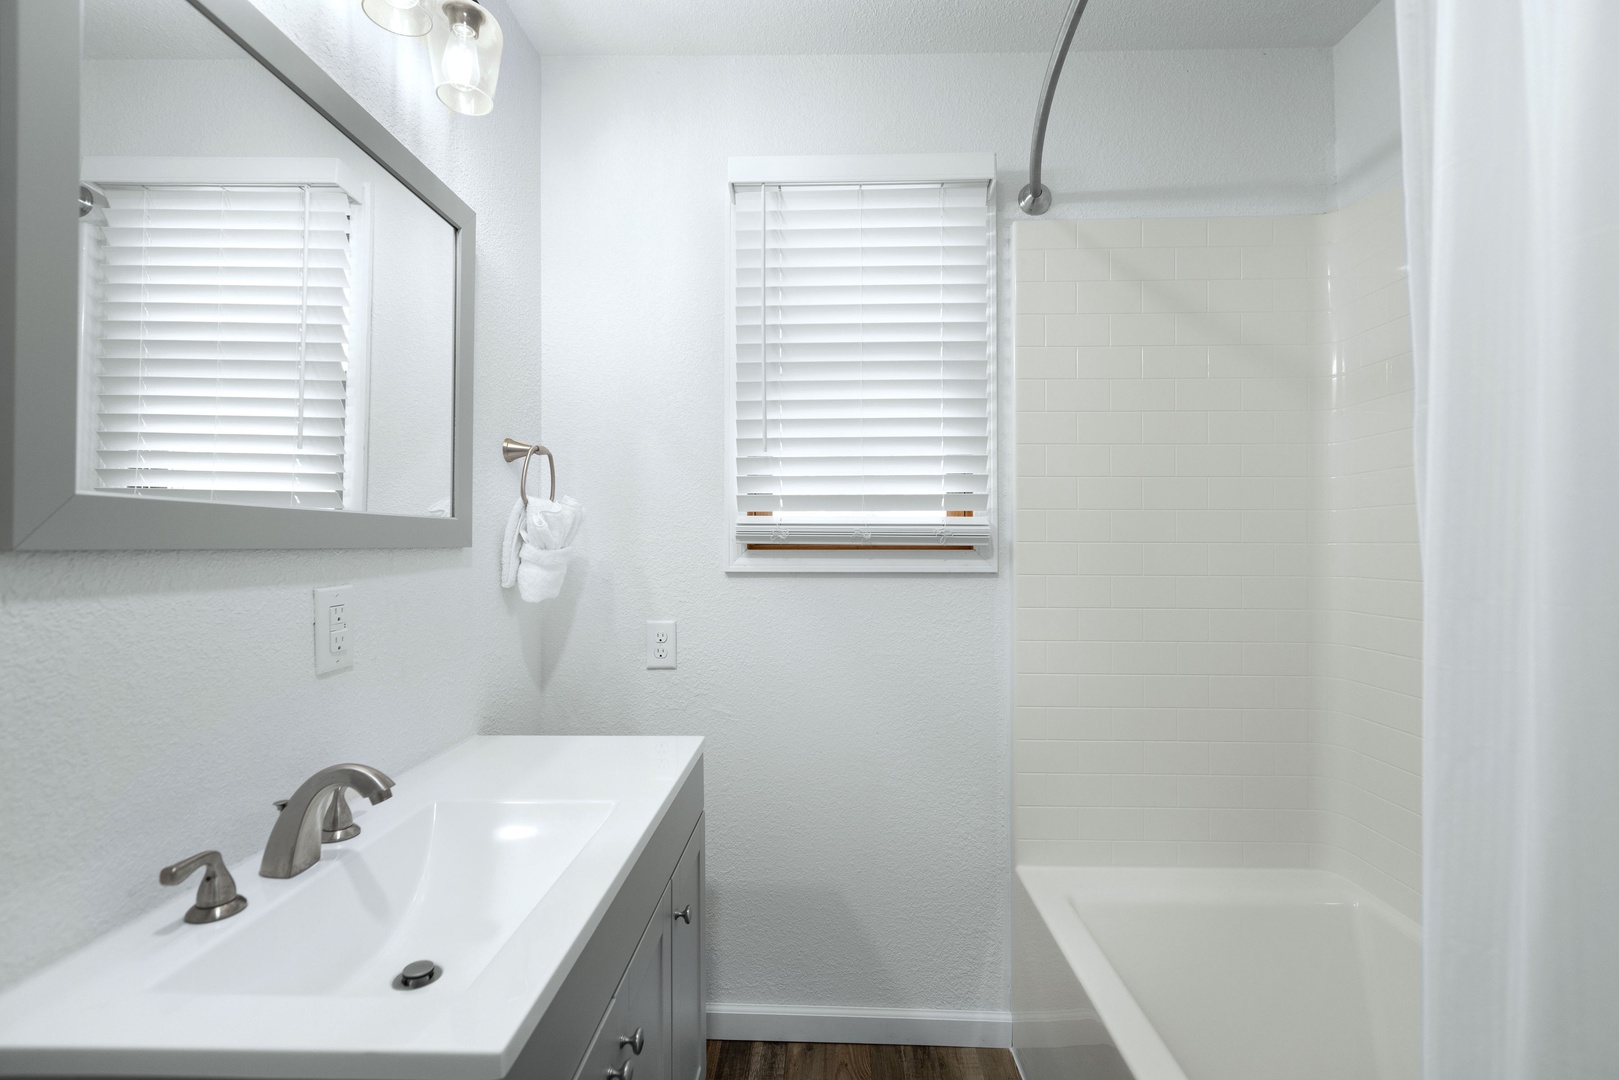 The hall bathroom between bedrooms #1 & #2 offers a single vanity & shower tub combo